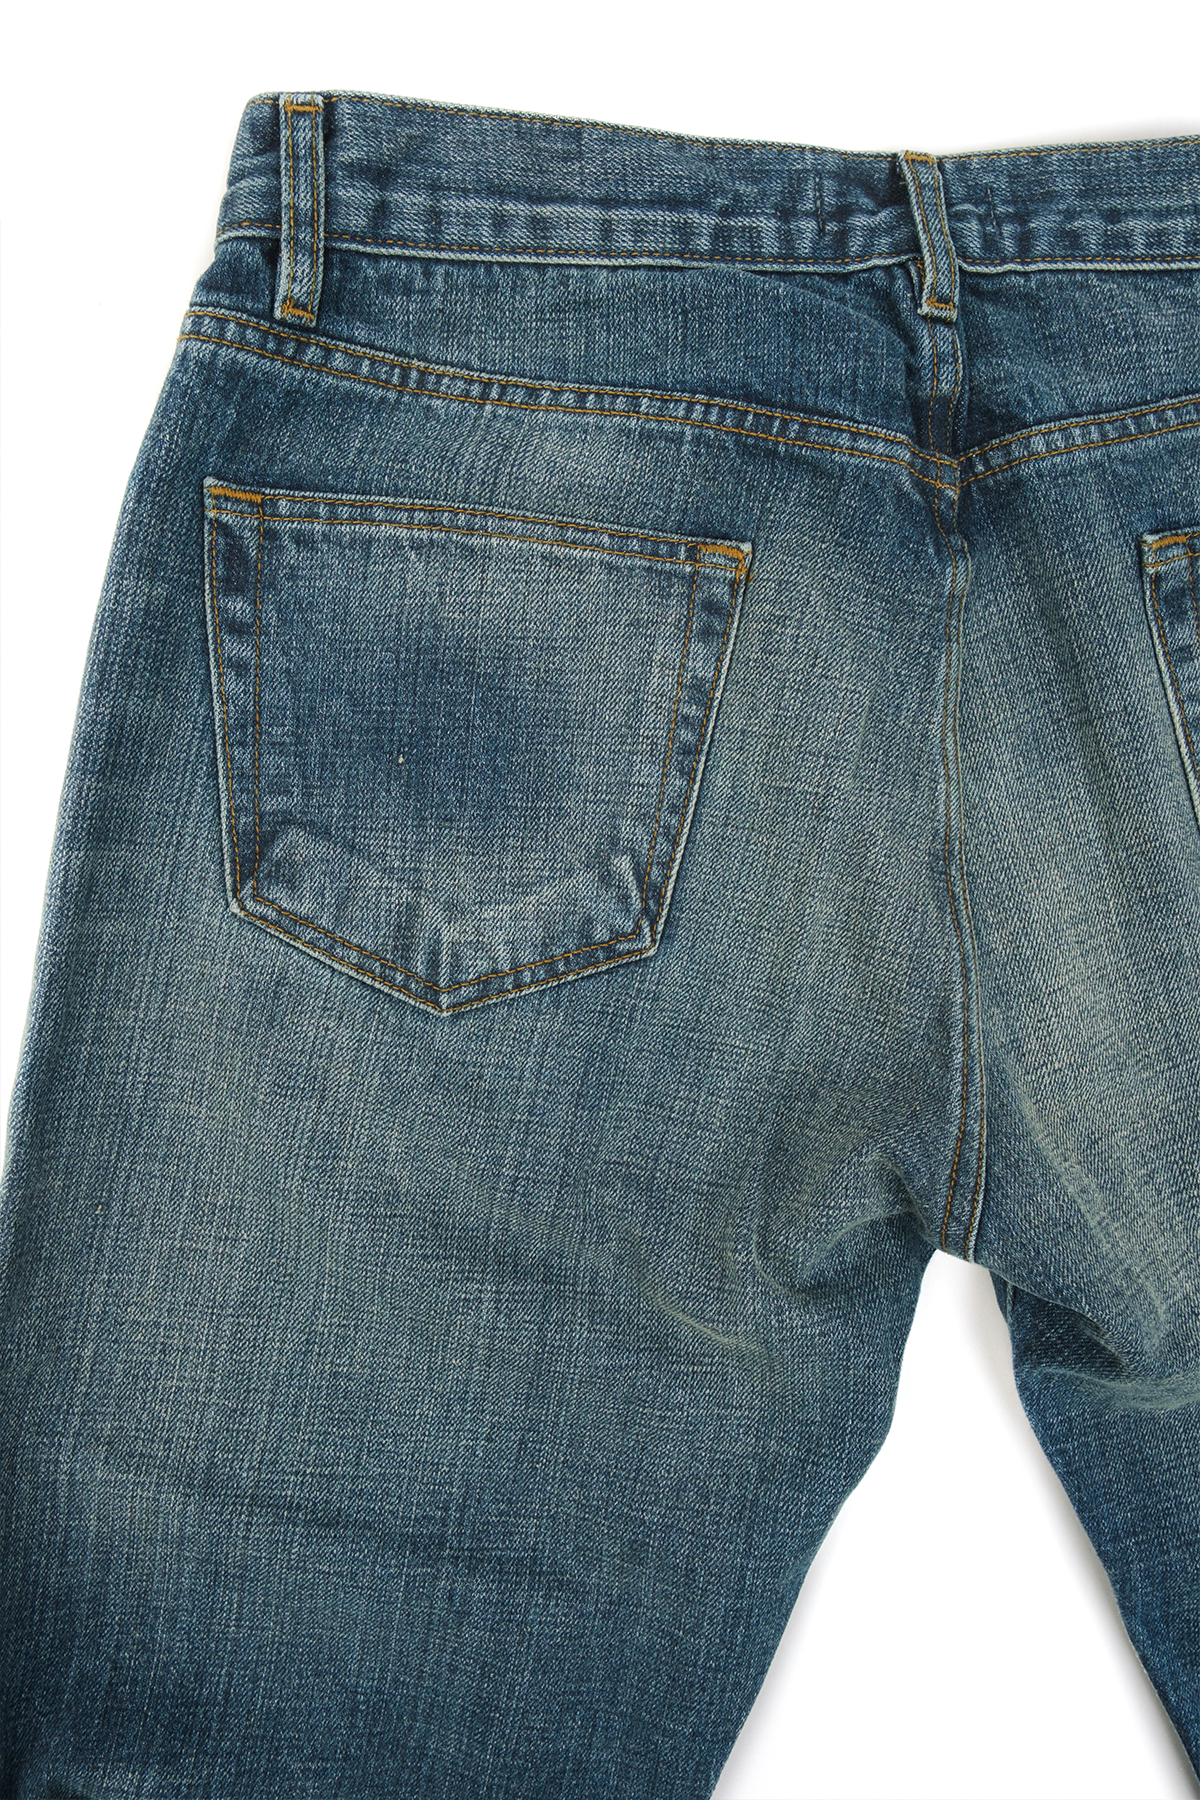 The Nelson Selvedge Vintage Wash